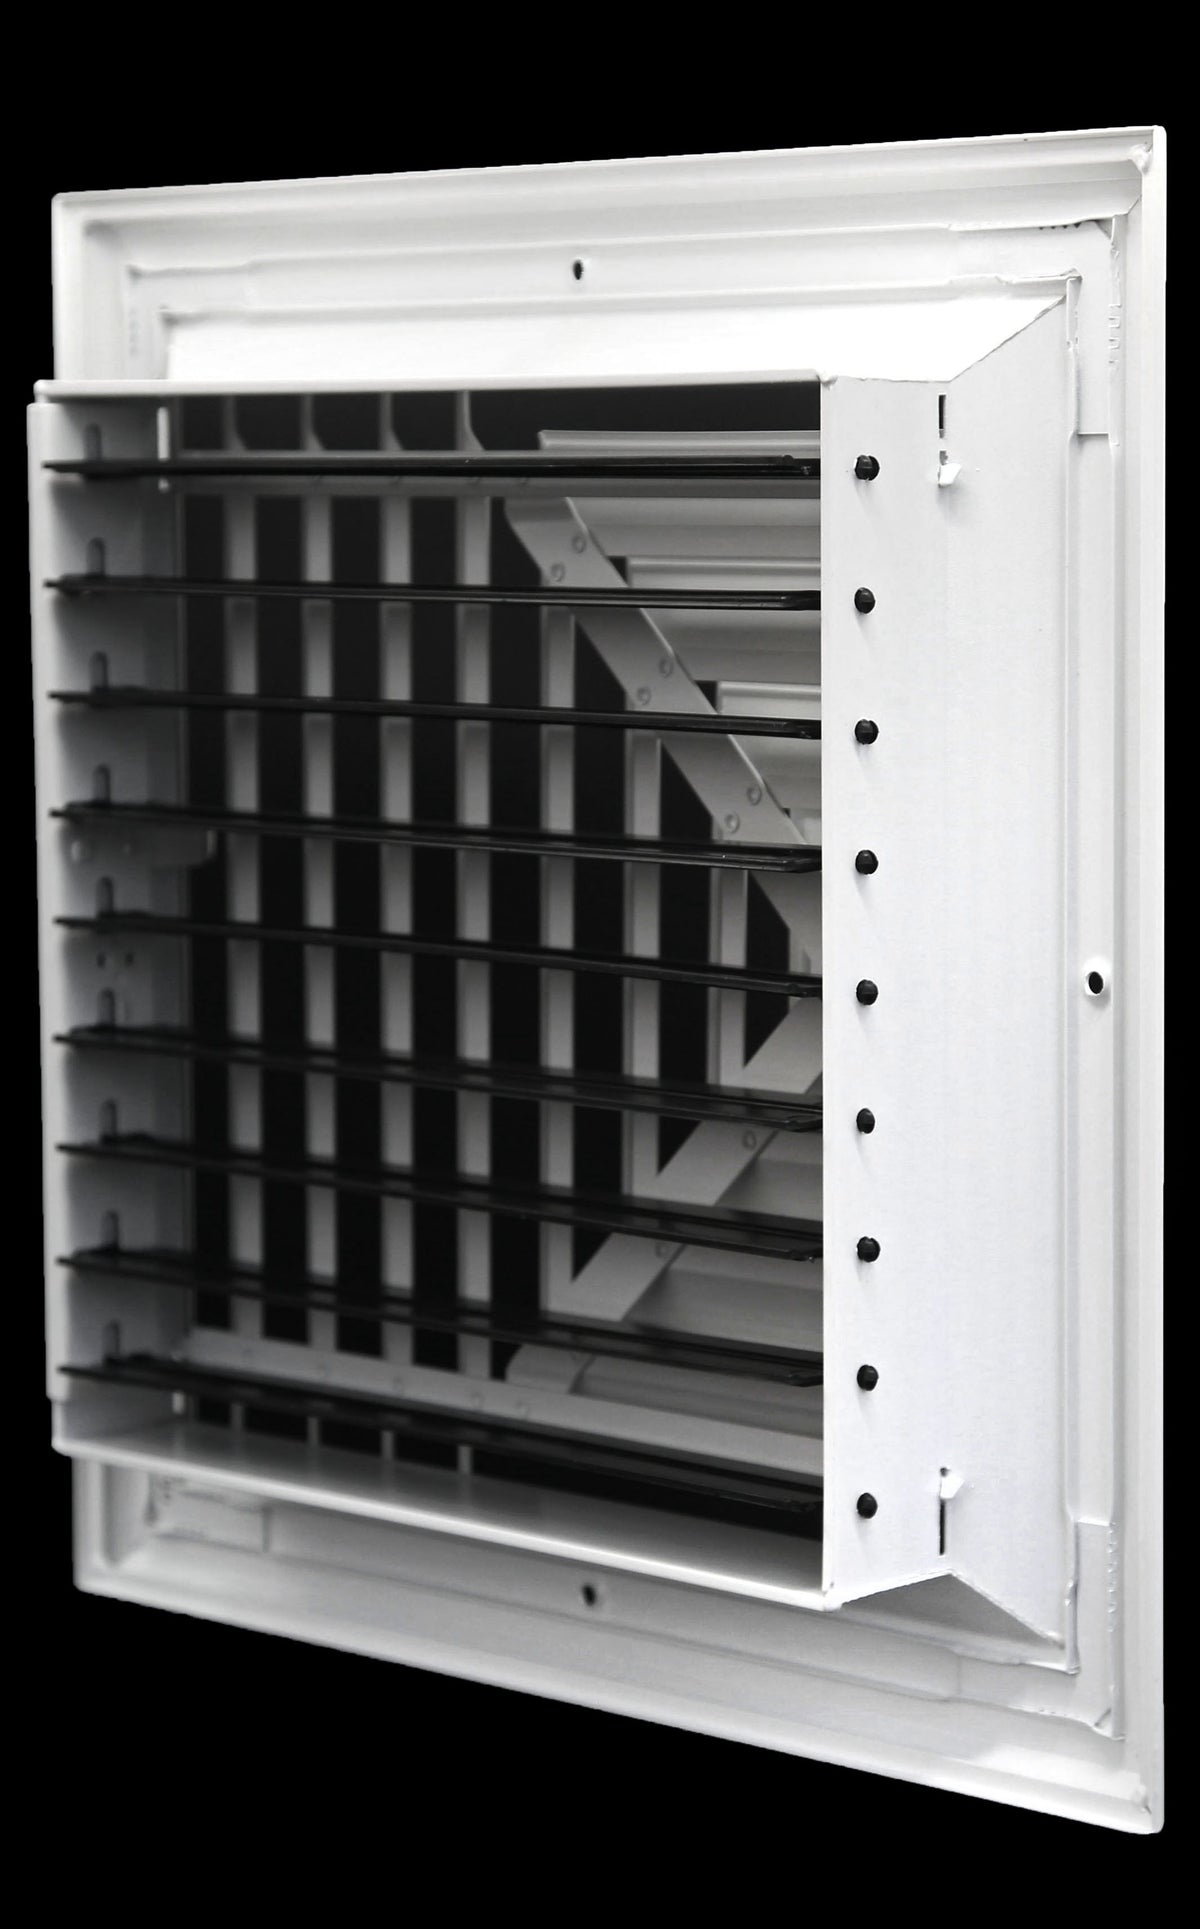 14&quot; x 14&quot; 4-WAY SUPPLY GRILLE - DUCT COVER &amp; DIFFUSER - LOW NOISE - For Ceiling - With Opposing Damper Blades